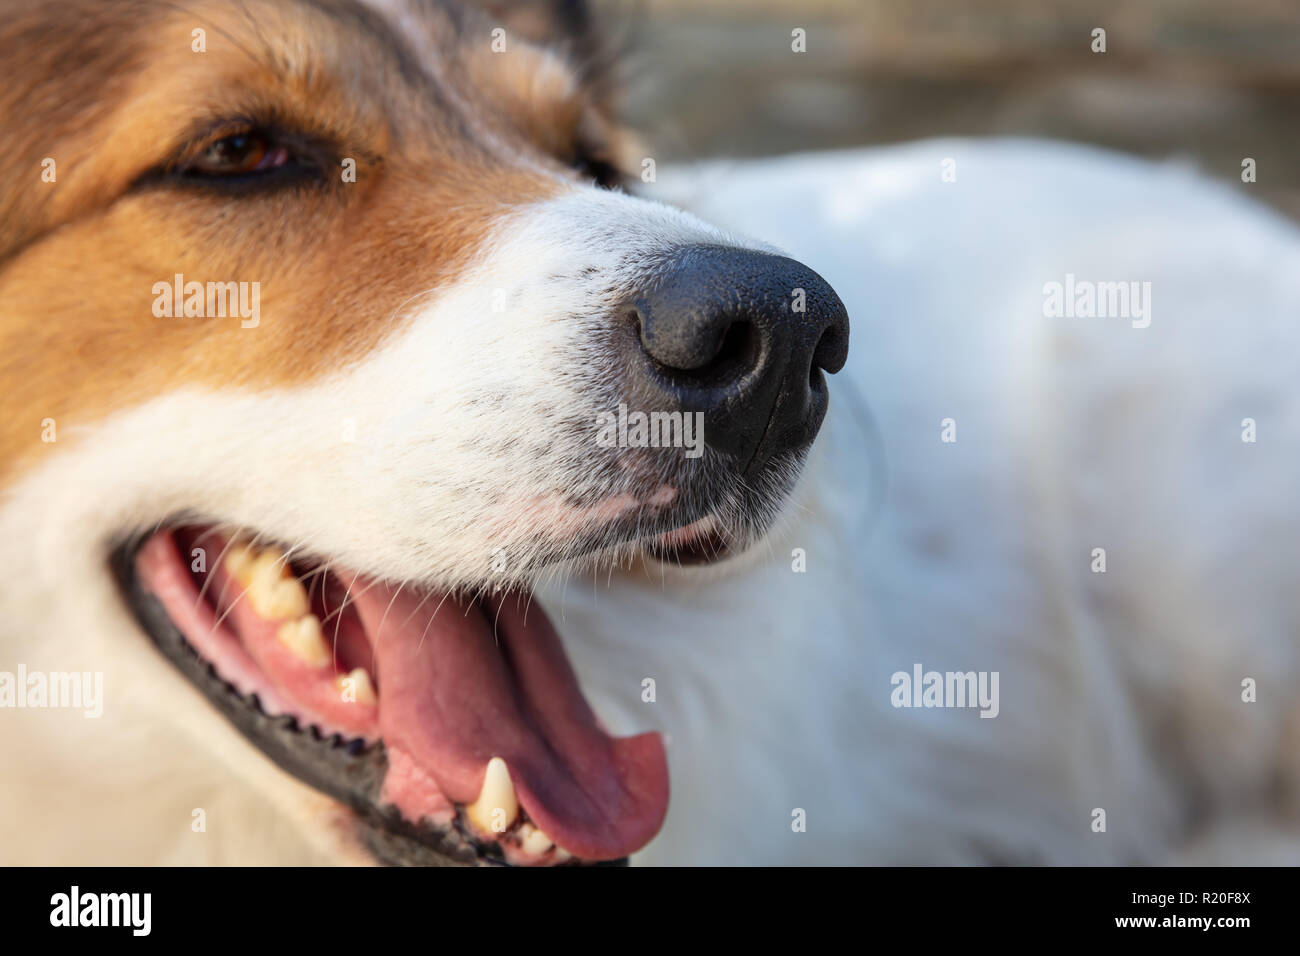 Side close up view of white and brown greek shepherd dog with open mouth against blurry background, Stock Photo